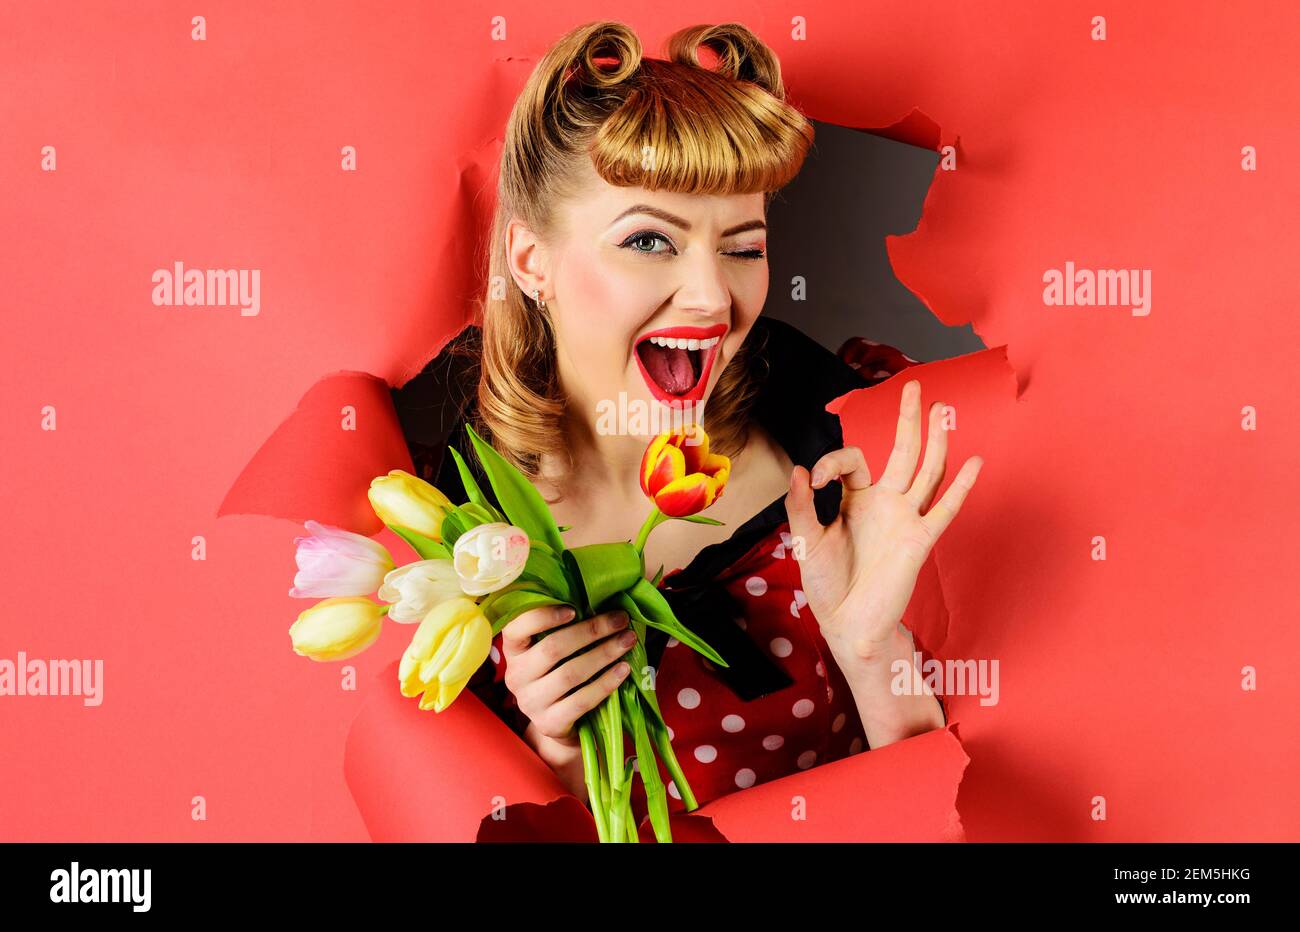 Winking woman with tulips shows sign ok. Smiling Pinup girl looking through paper. Happy female with Bouquet of flowers. Stock Photo